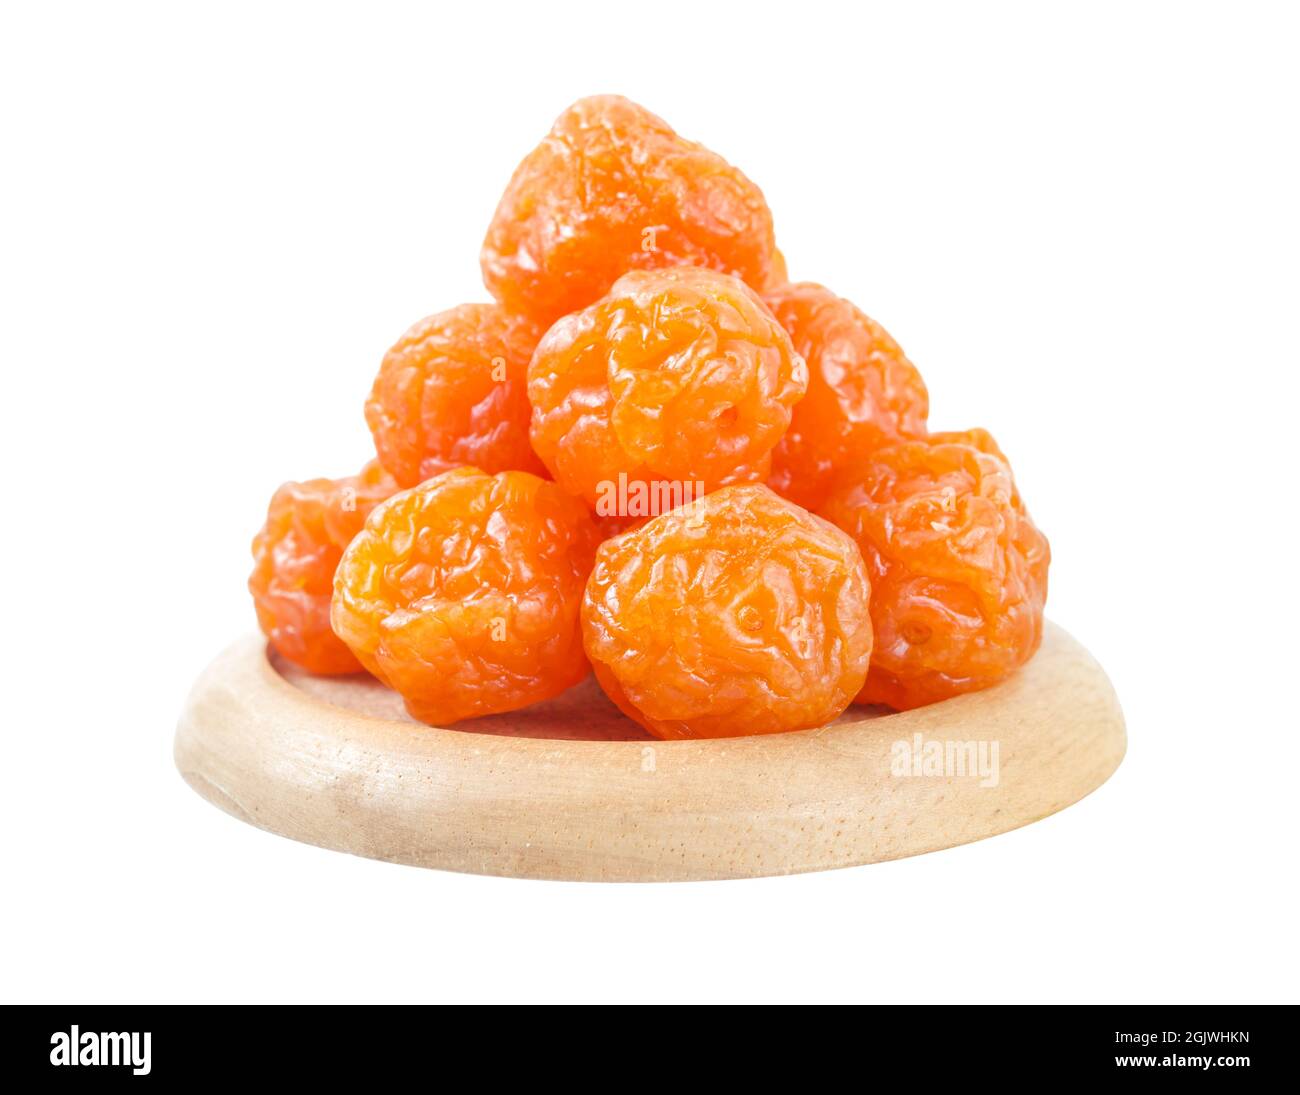 Dried apricot plum fruits(Preserved fruits or dried honey Chinese plum) on white background Stock Photo